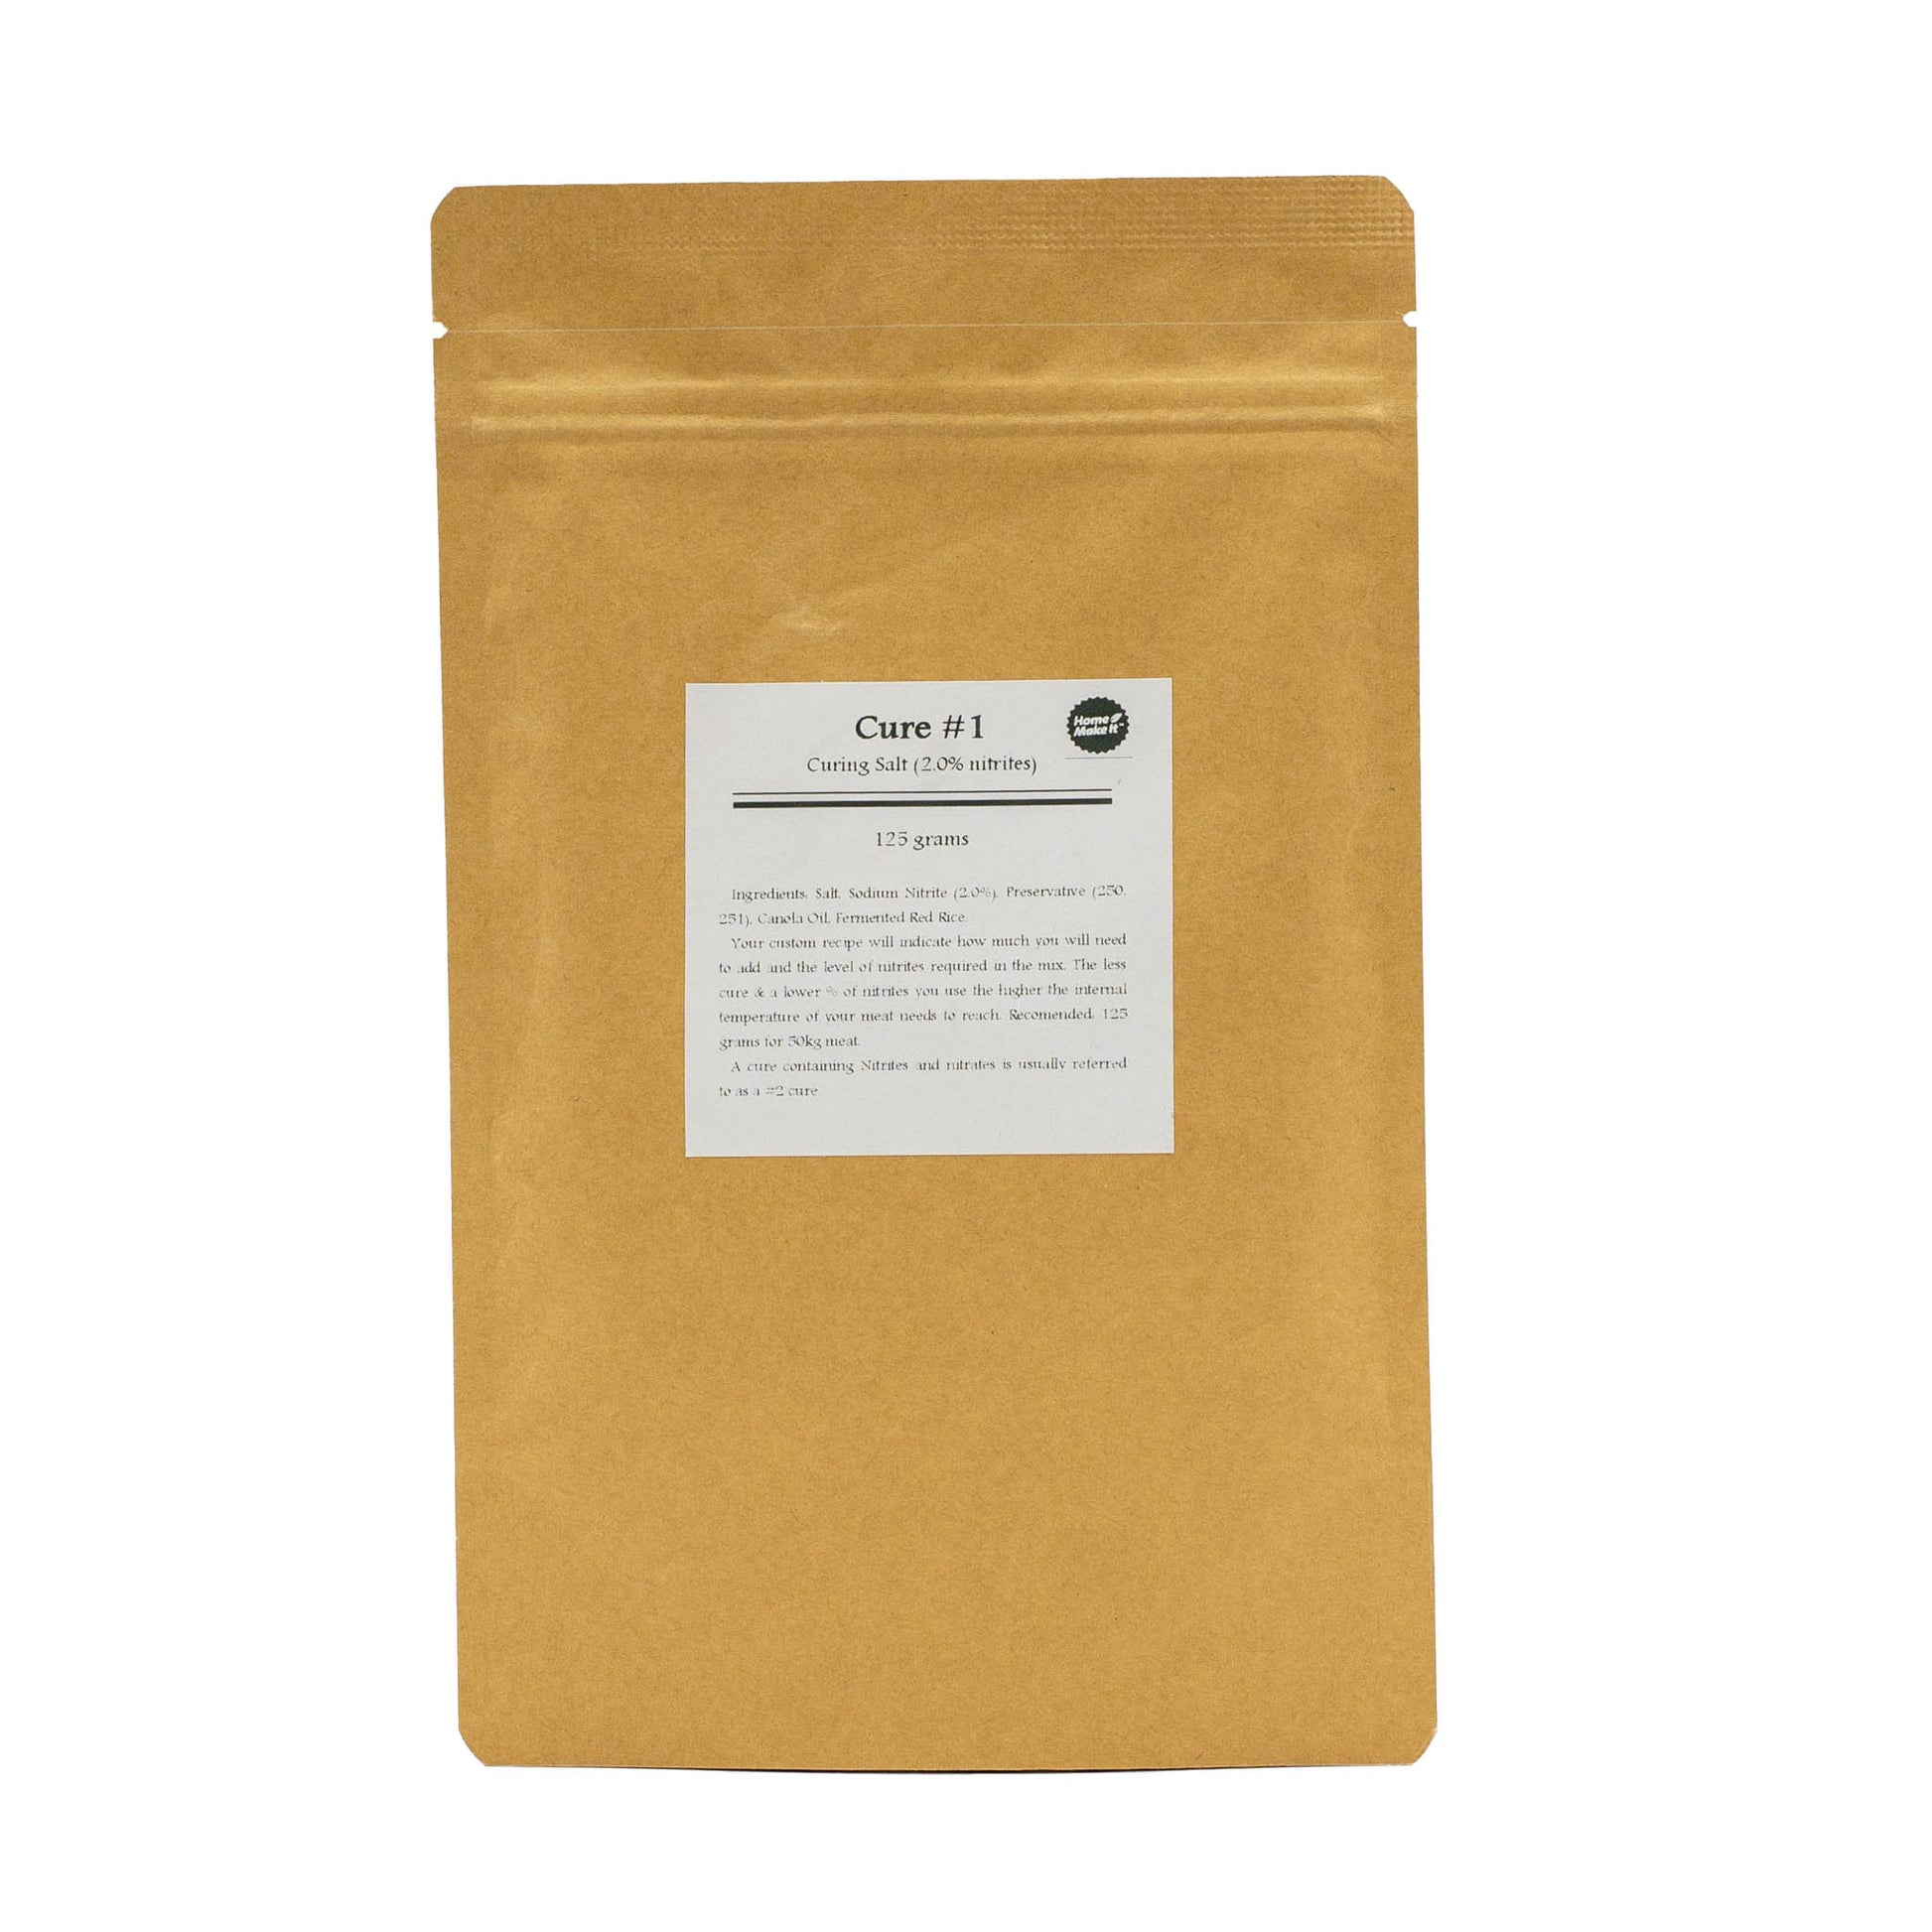 250g bag of Cure #1 with 2% nitrites required for safe processing of semi dried meats such as jerky, bacon and sausages that are heat treated in a smoker or oven.